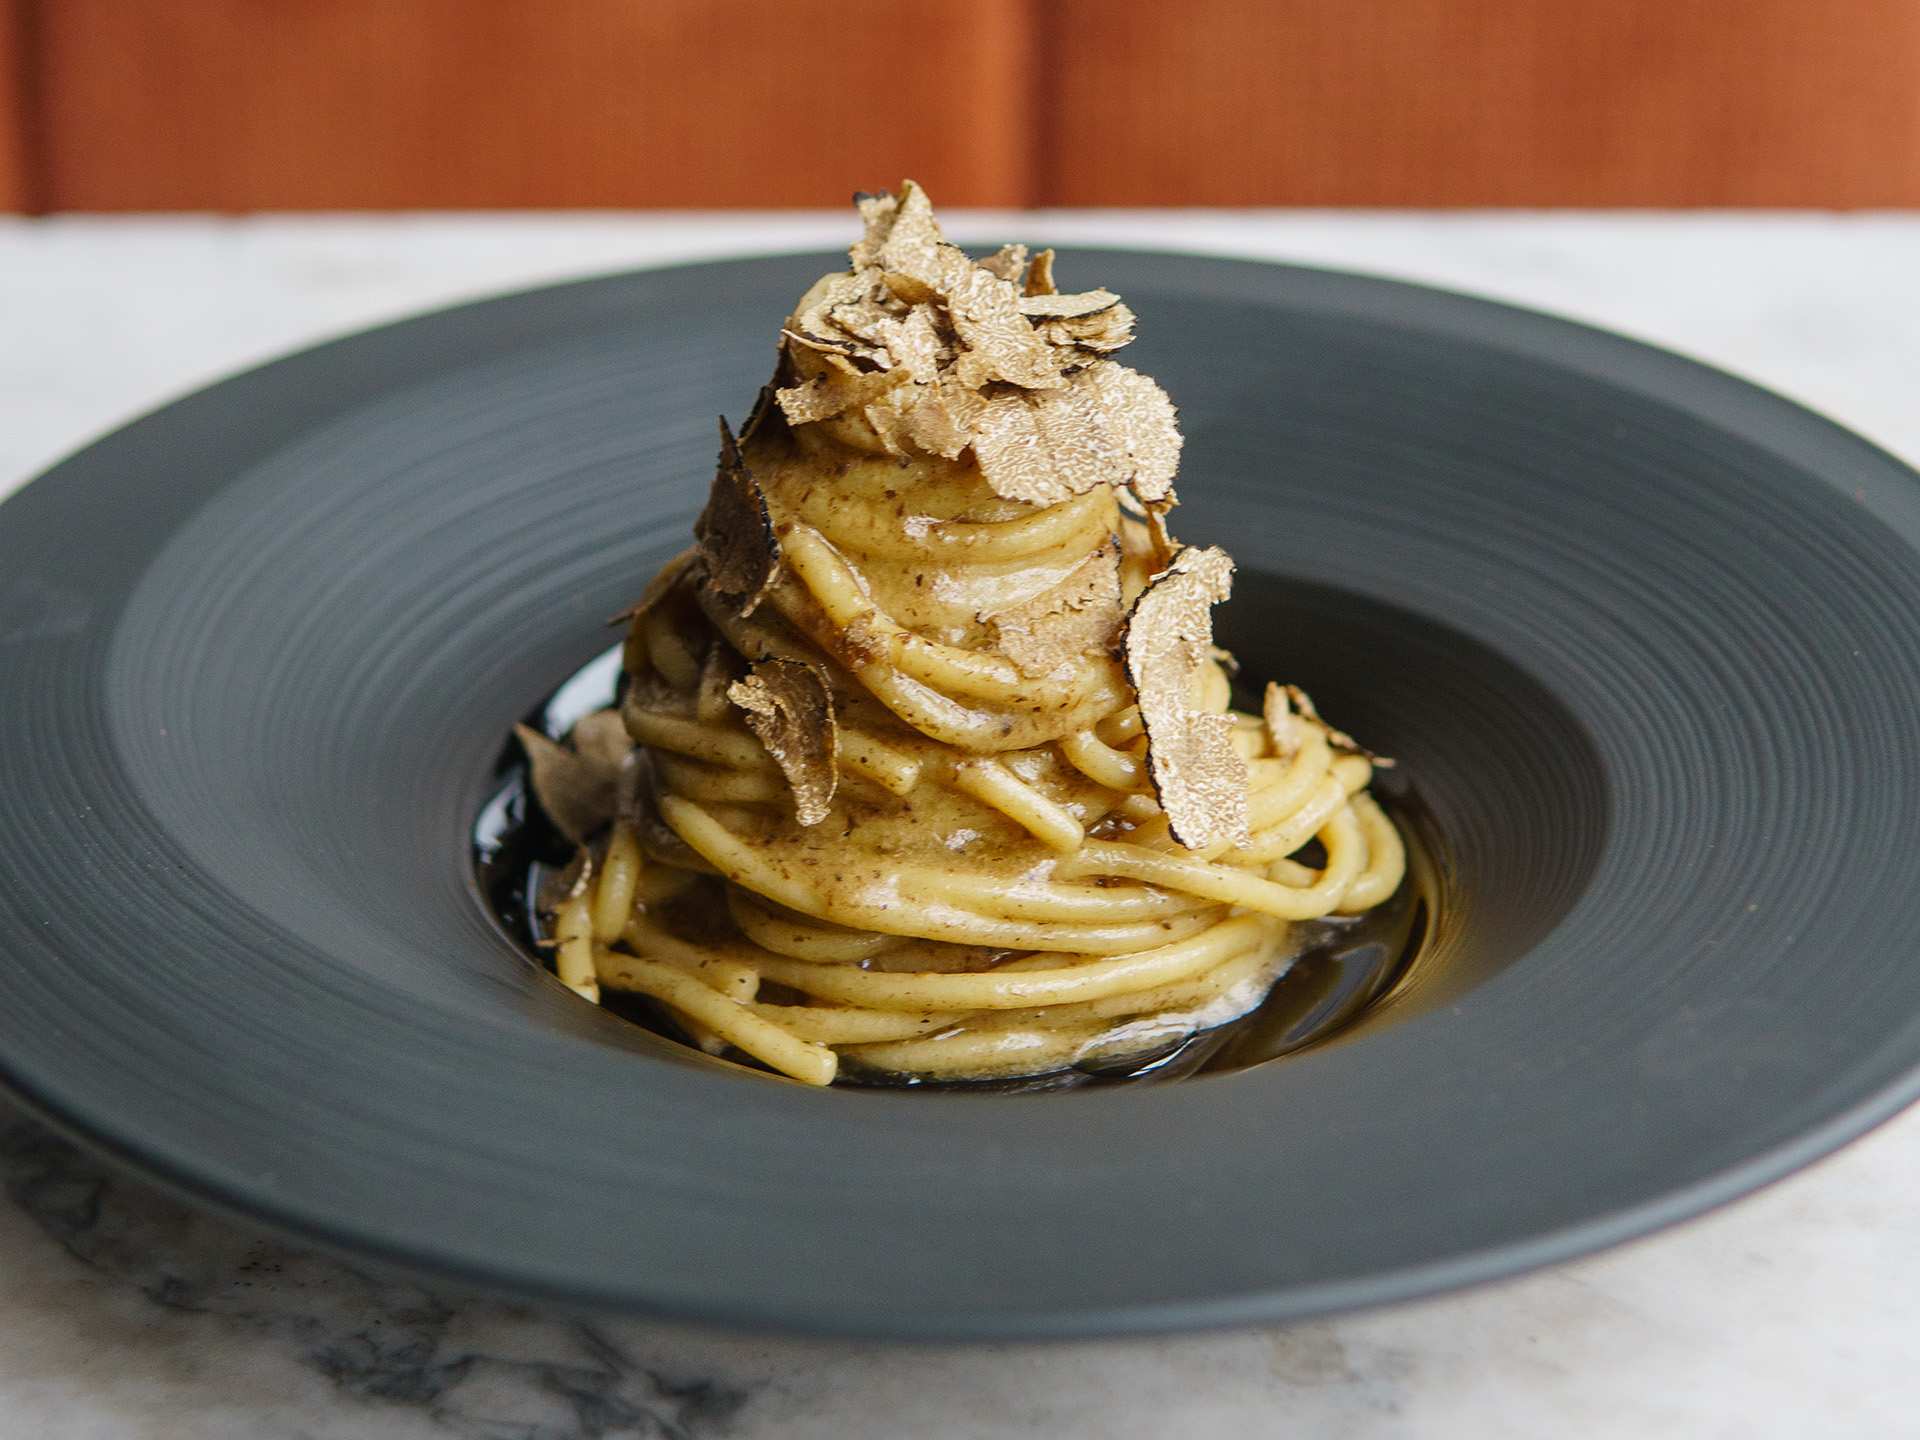 The best vegan restaurants in Toronto | A stack of pasta with truffle from Gia